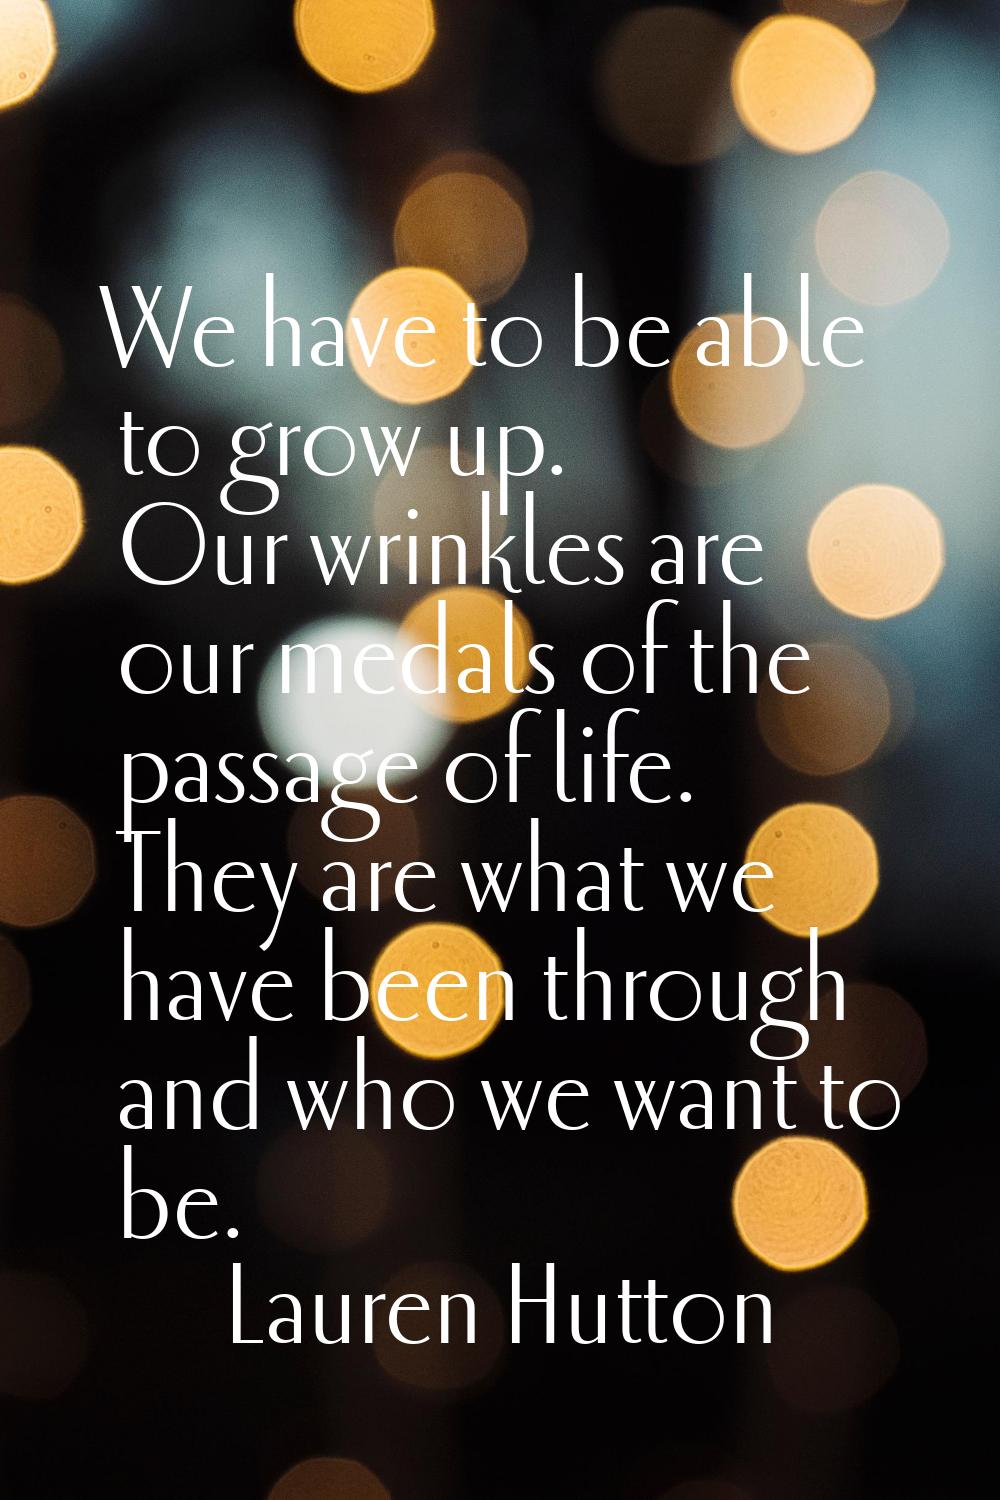 We have to be able to grow up. Our wrinkles are our medals of the passage of life. They are what we